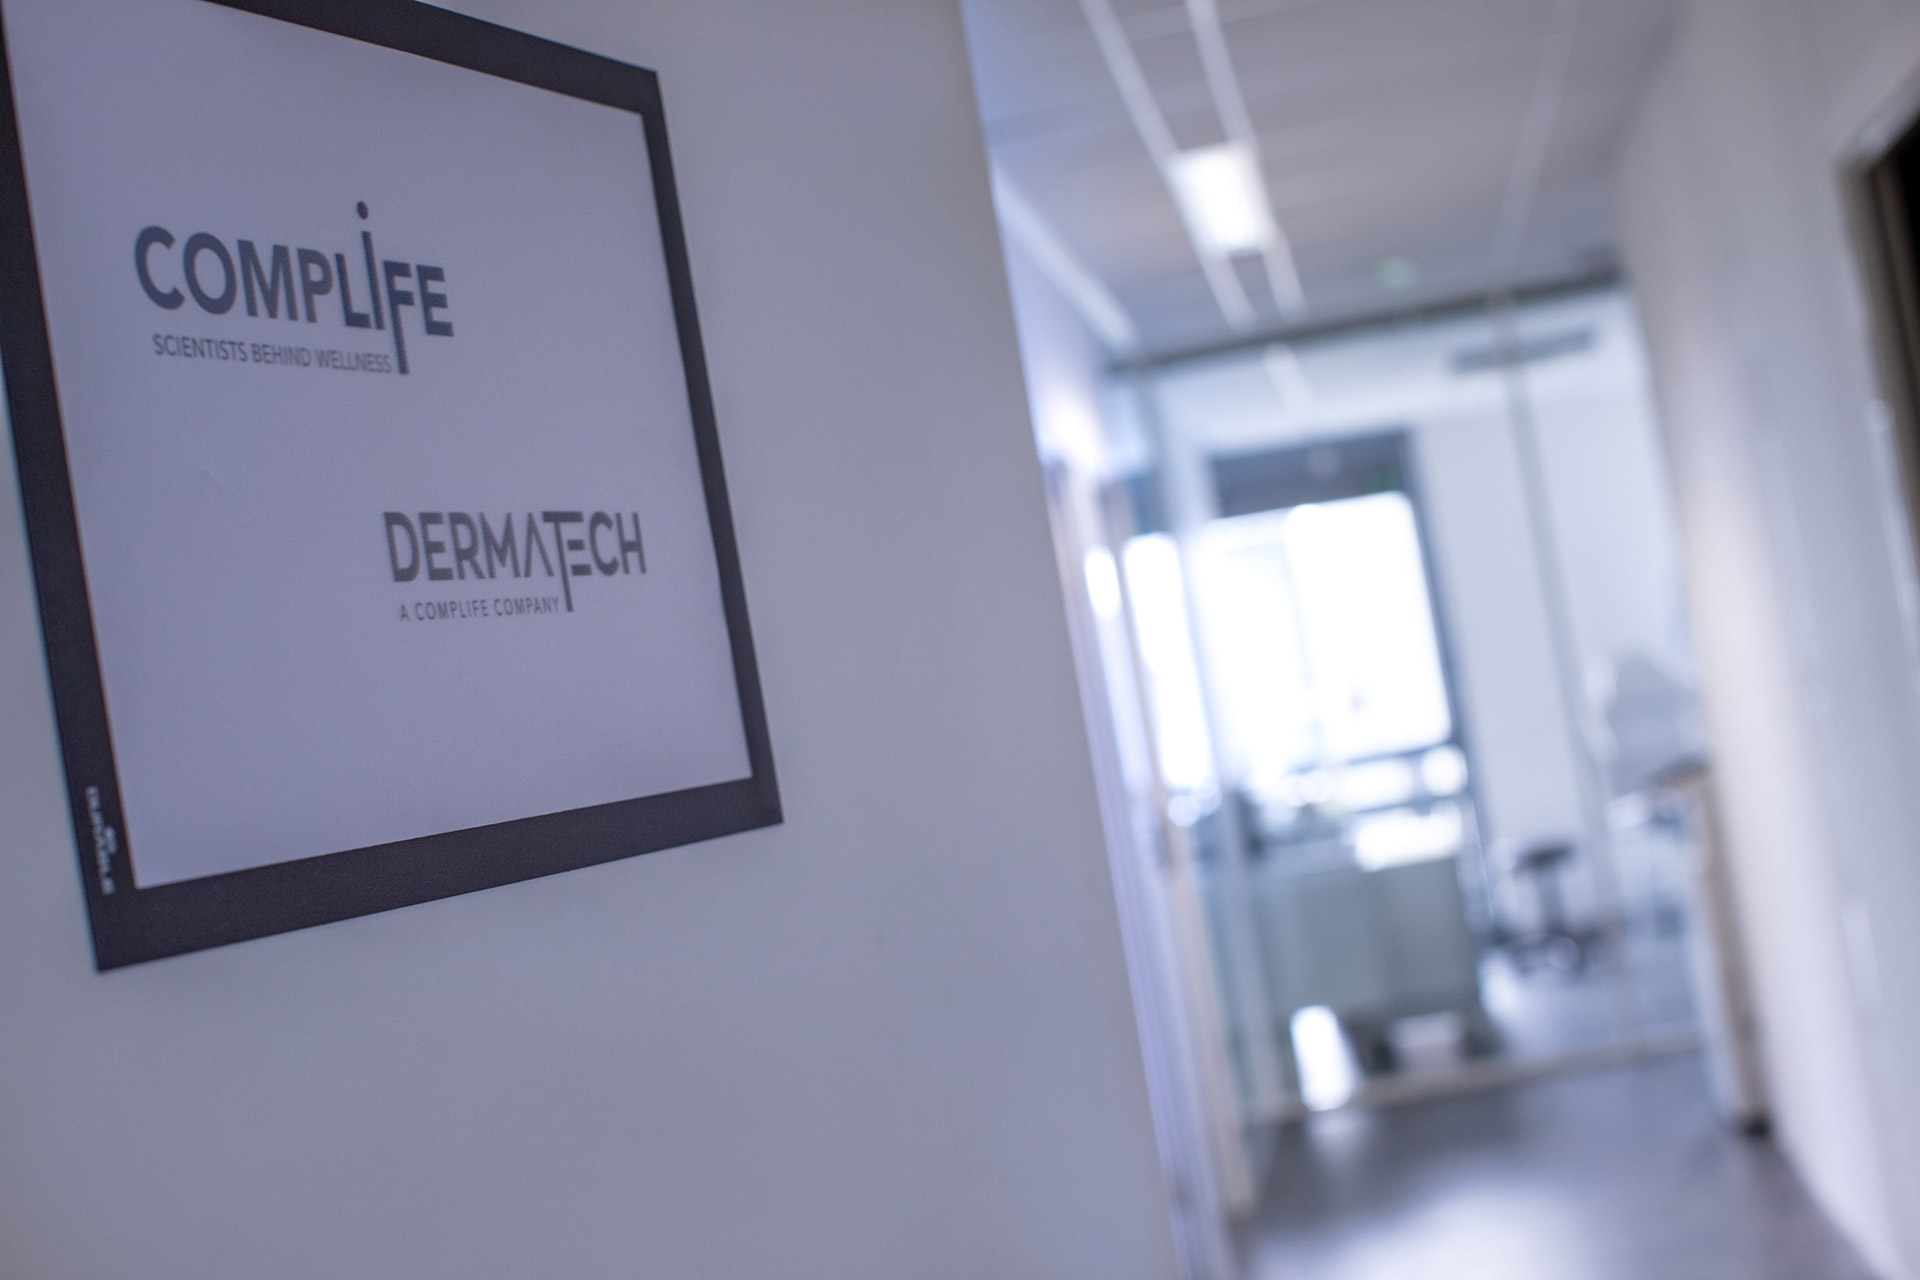 See the news  Dermatech and Complife France set up in Lyon’s 8th arrondissement